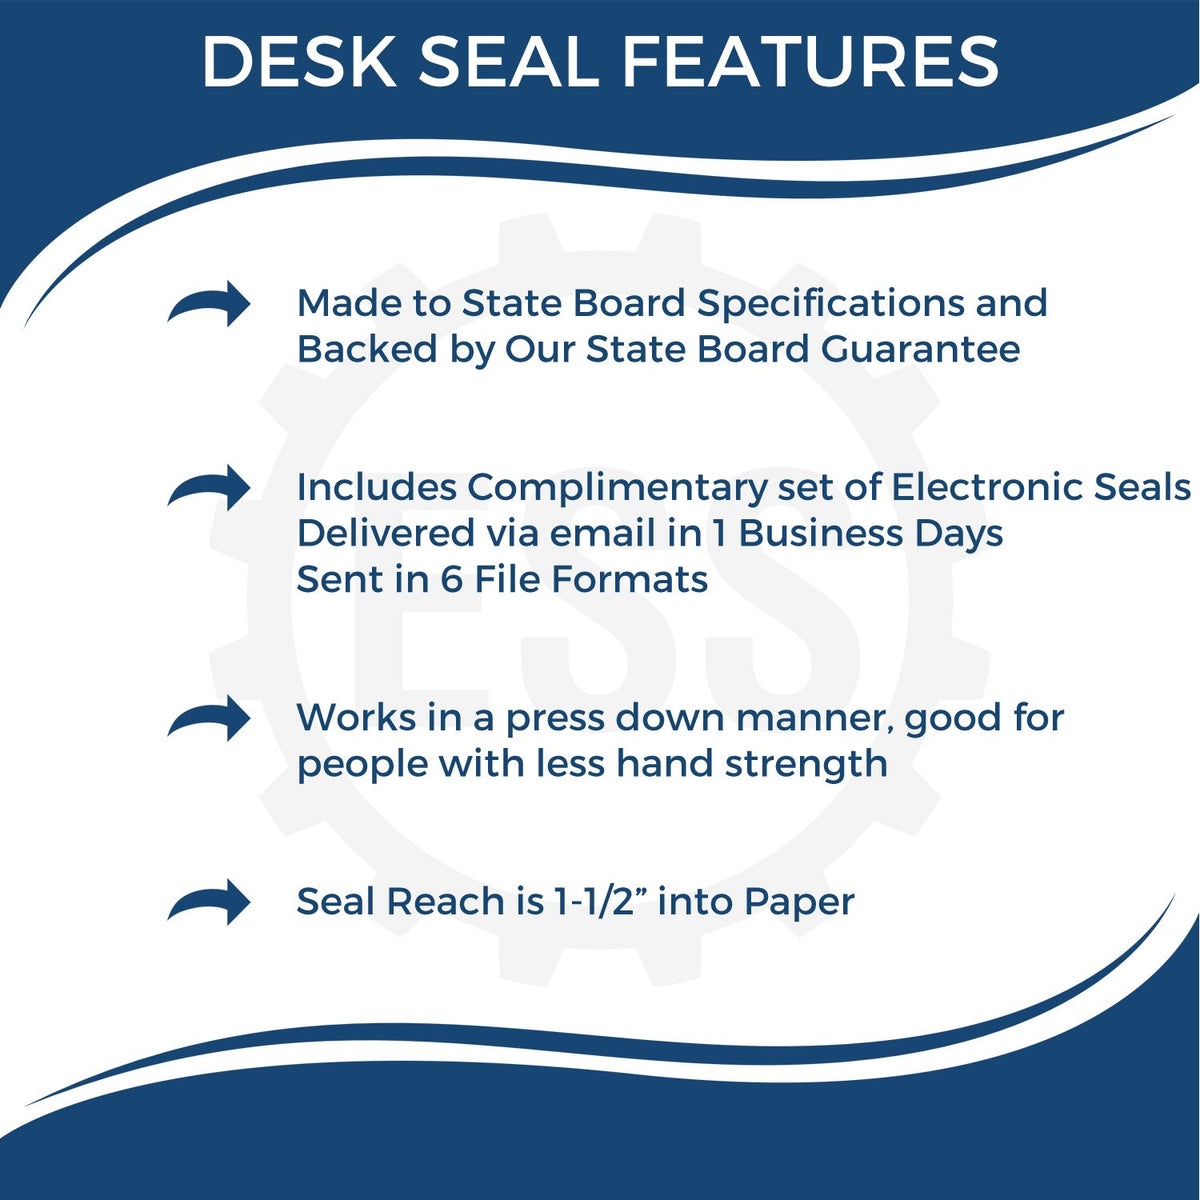 A picture of an infographic highlighting the selling points for the Nevada Geologist Desk Seal